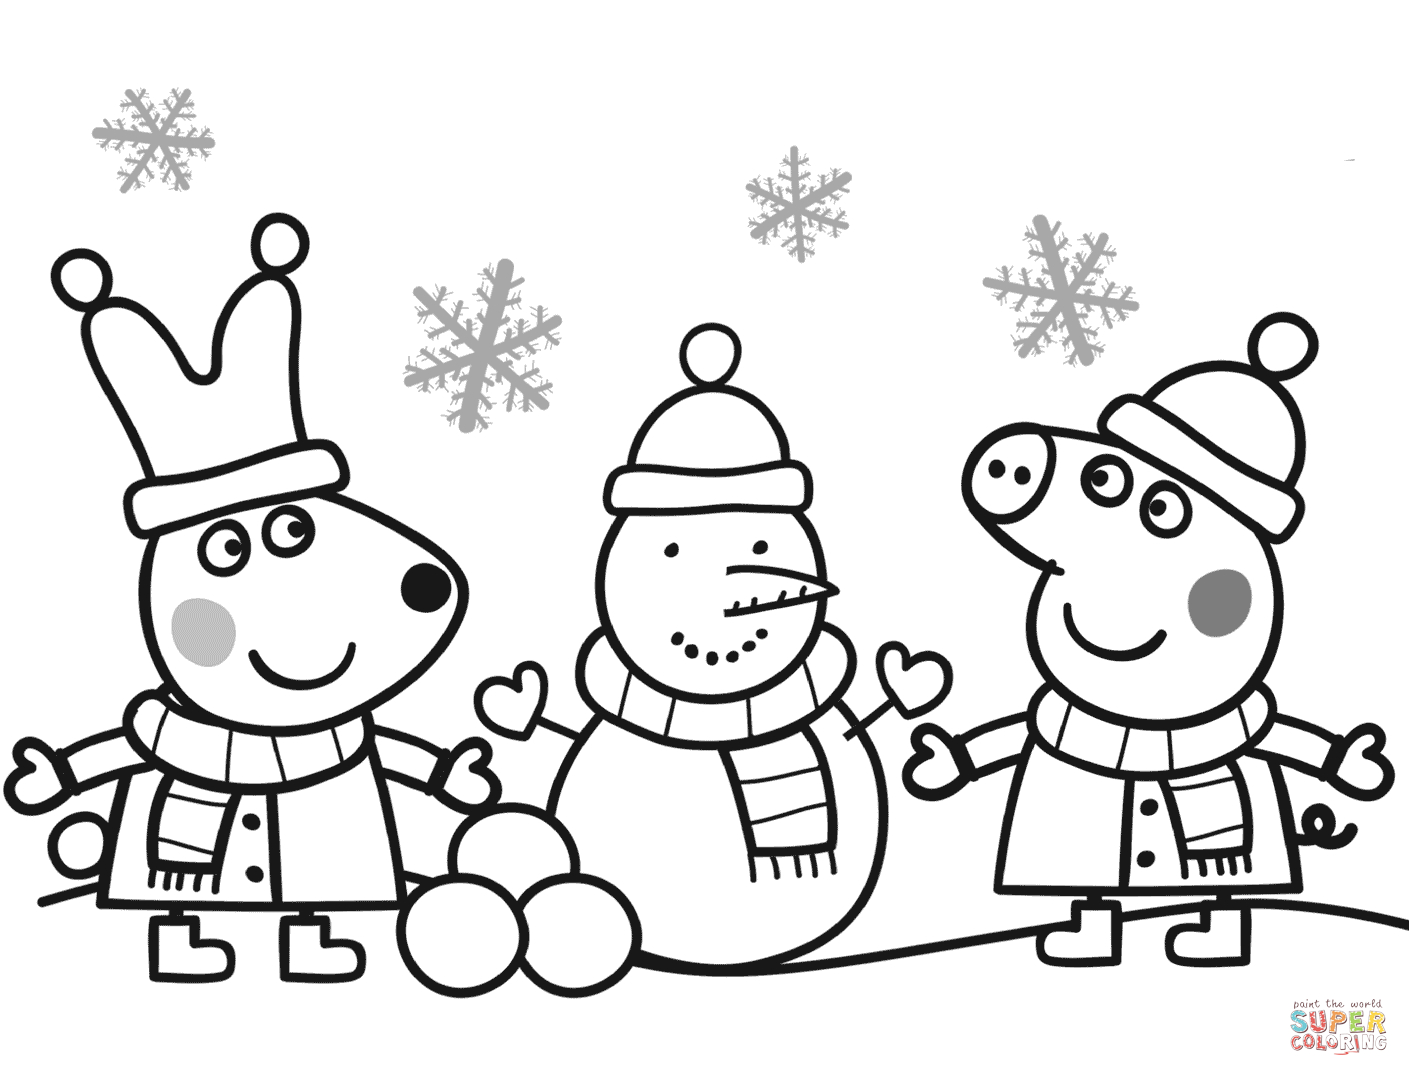 Peppa And Rebecca Are Making Snowman Coloring Page | Free Printable - Pig Coloring Sheets Free Printable